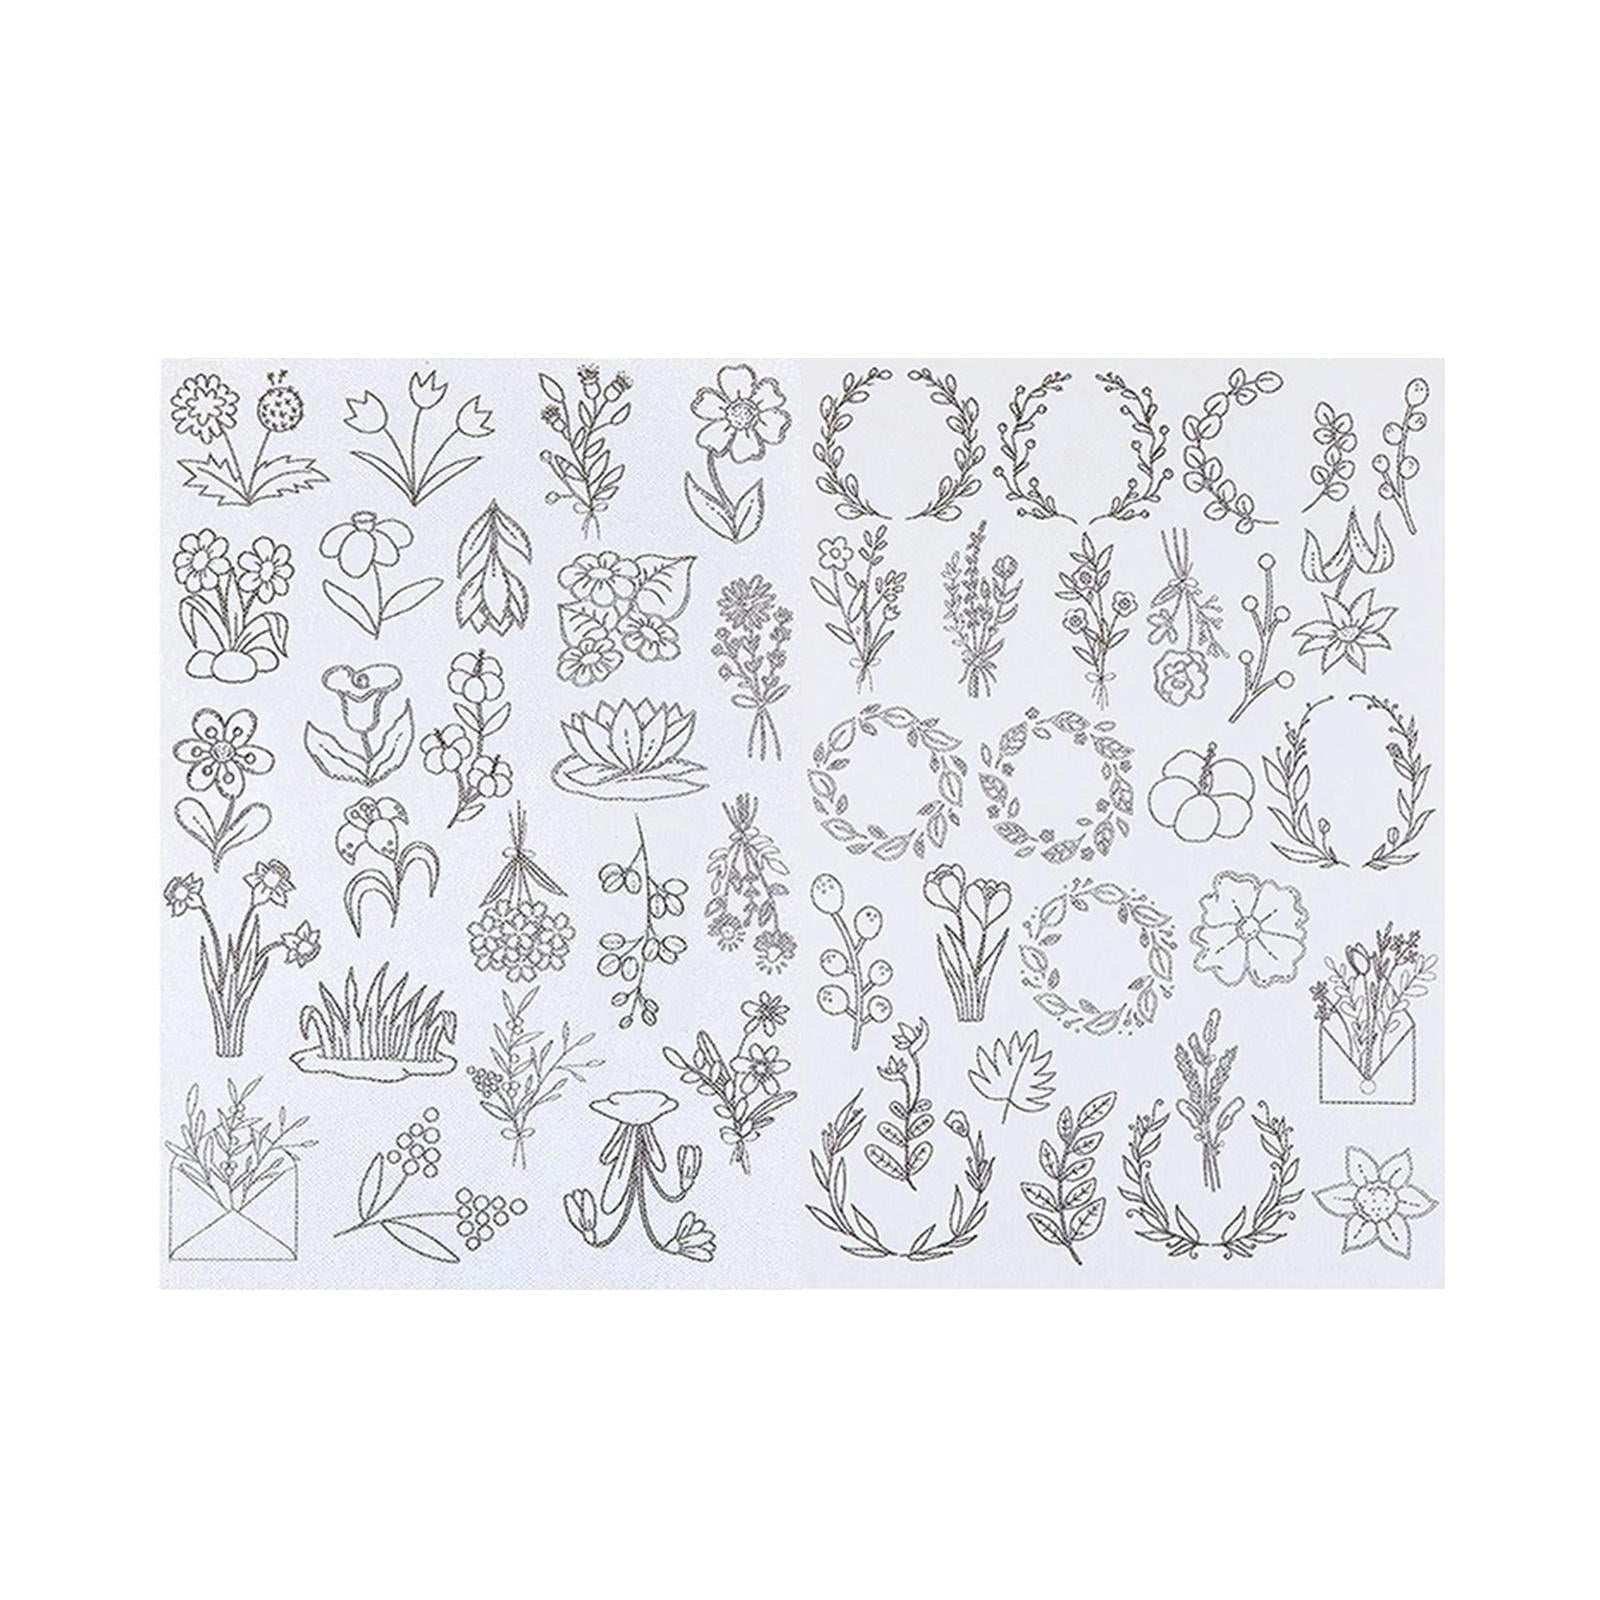 75 Pcs Water Soluble Embroidery Patterns, 3 Template Sheet